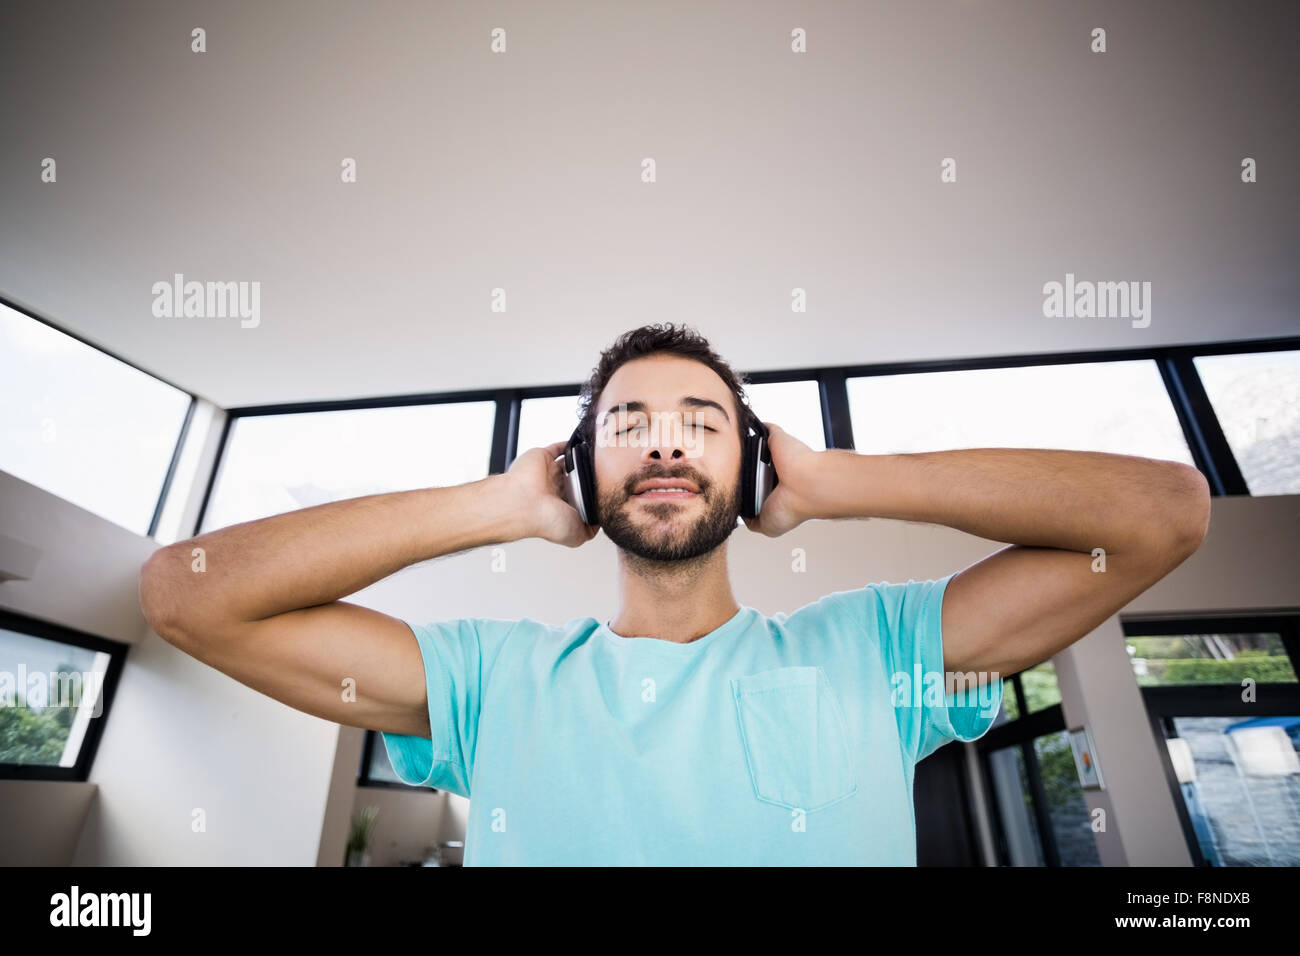 Relaxed man with hands on headphones Stock Photo